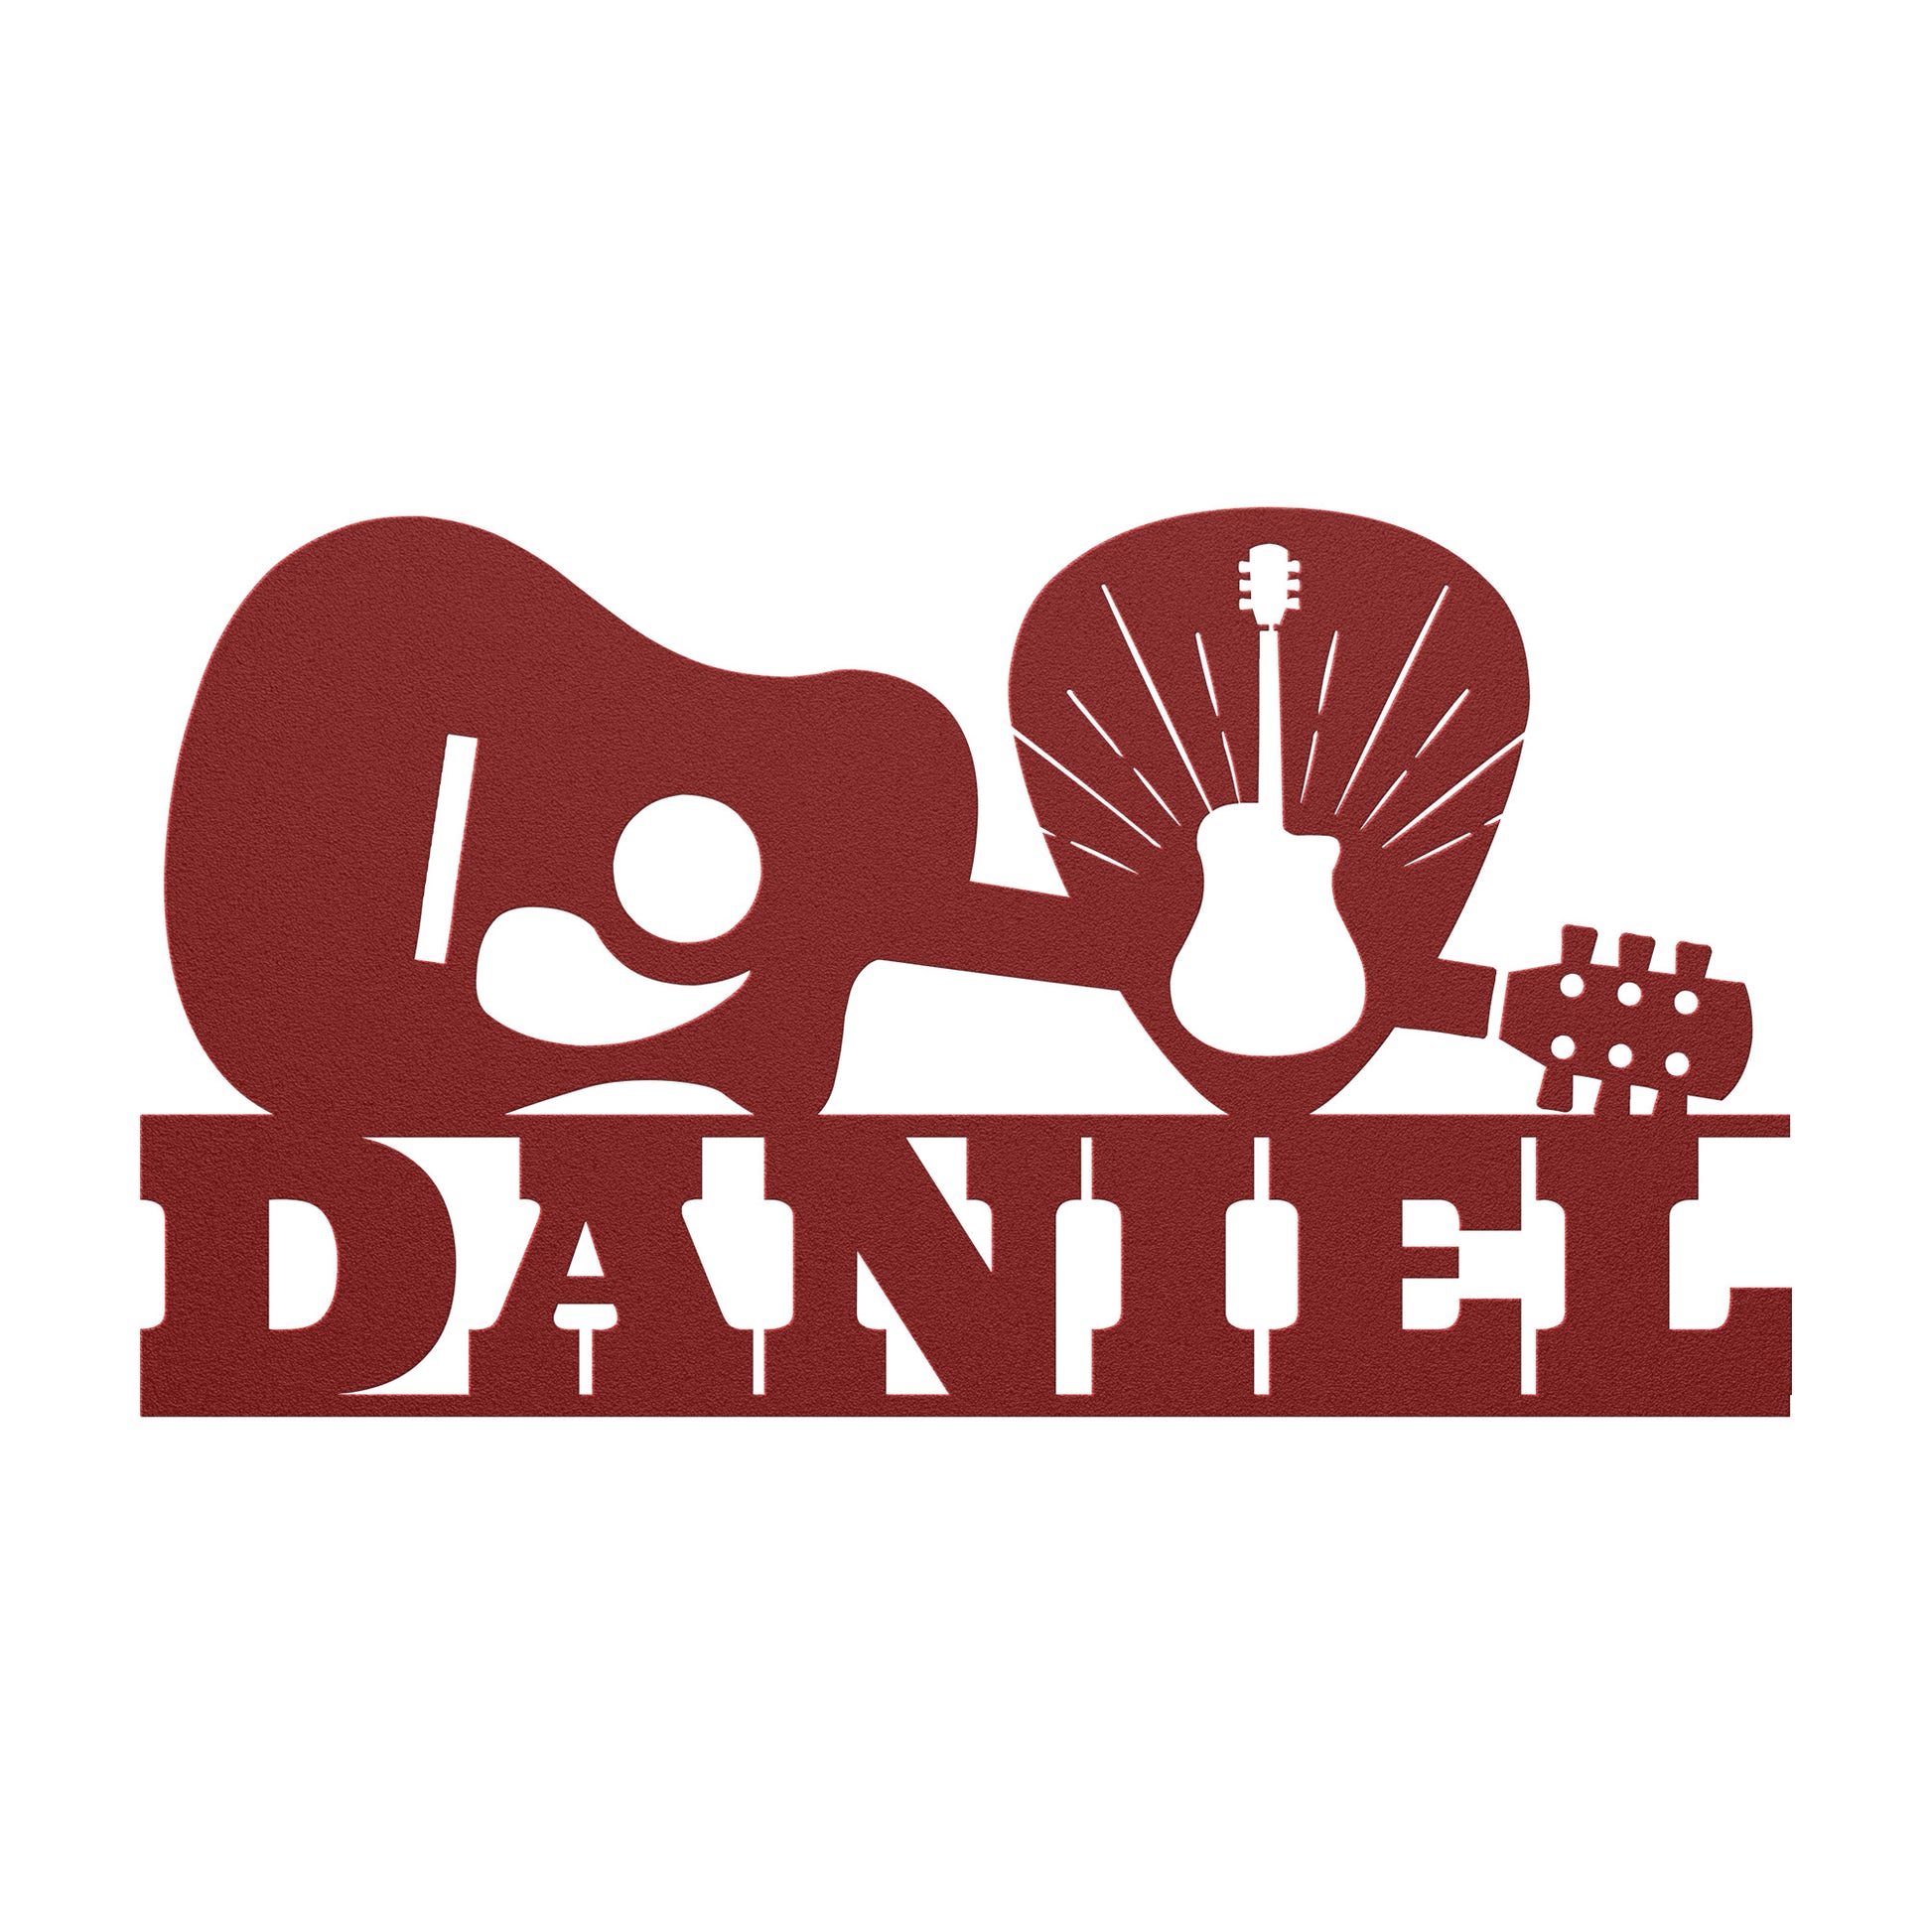 A personalized Acoustic Guitar Wall Sign Custom Name featuring the name 'Daniel' with themed graphics that include a guitar, a light bulb, and scientific elements, suggesting a blend of creativity, music, and innovation for the music.